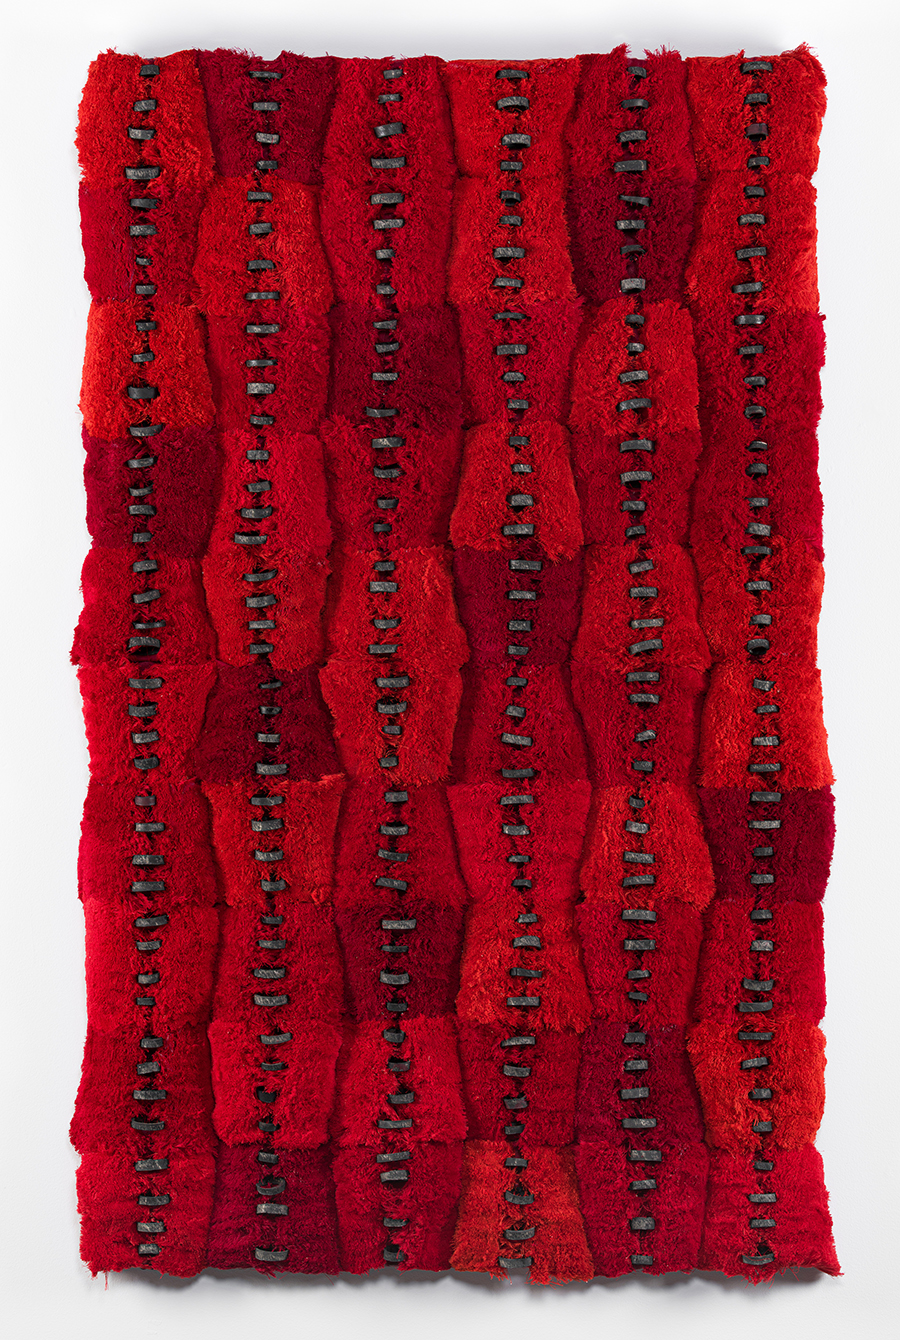 A red textured art piece hangs on a white wall.